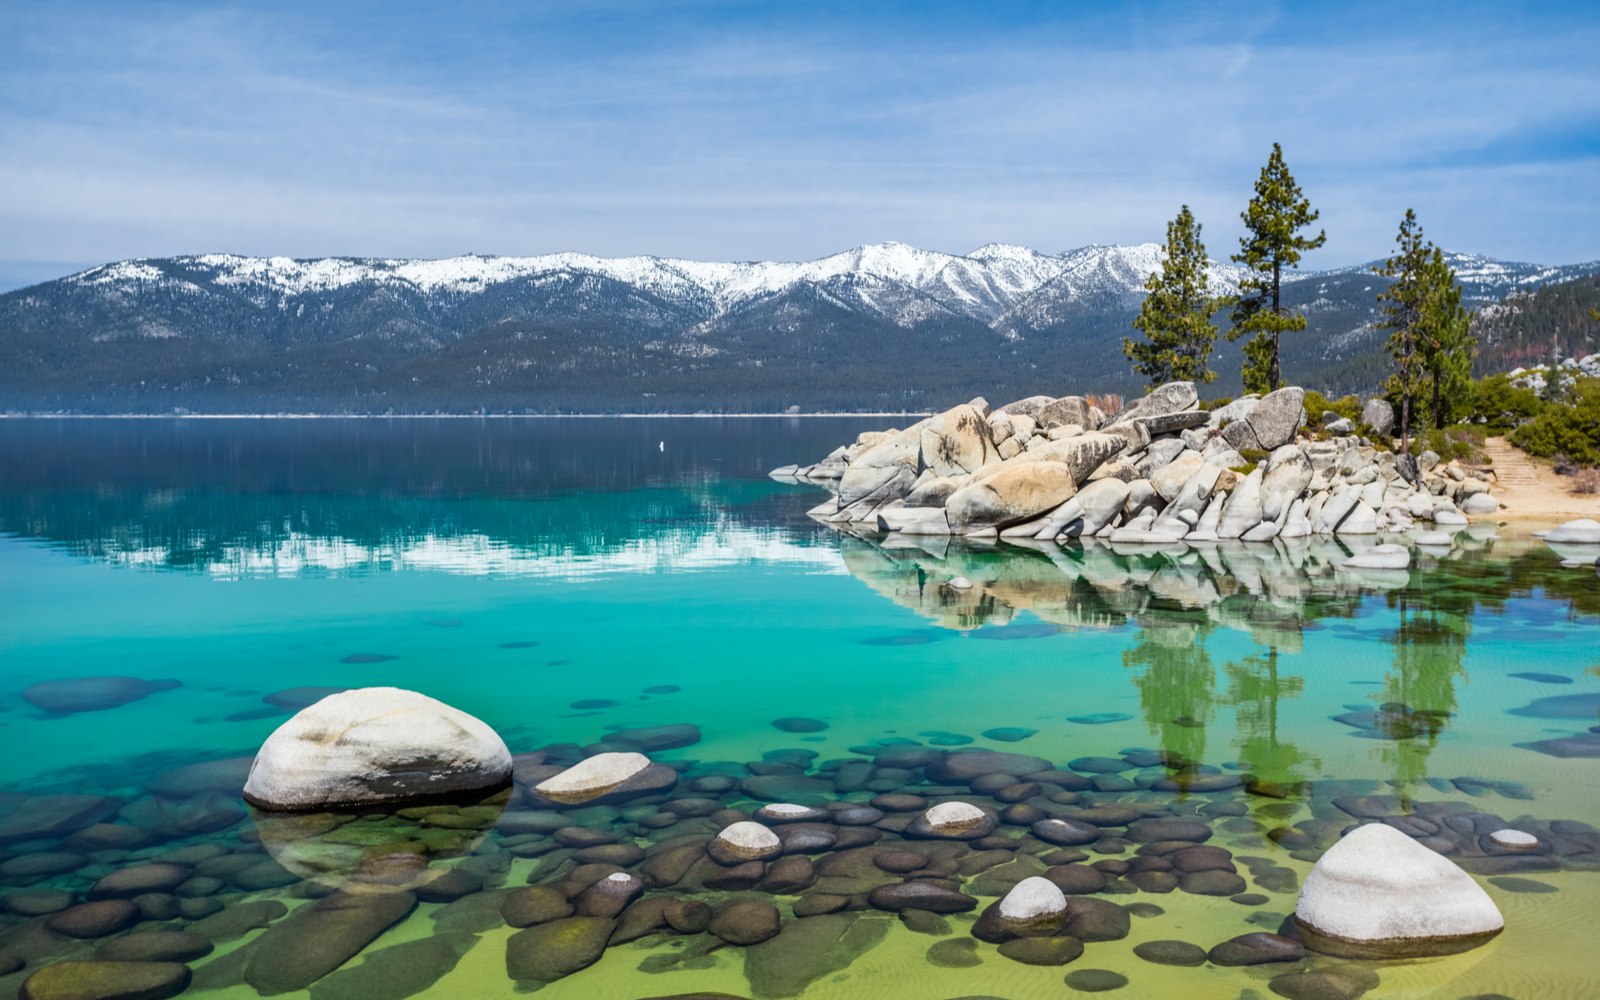 Shot from the banks of Sand Harbor Beach during the best time to visit Lake Tahoe